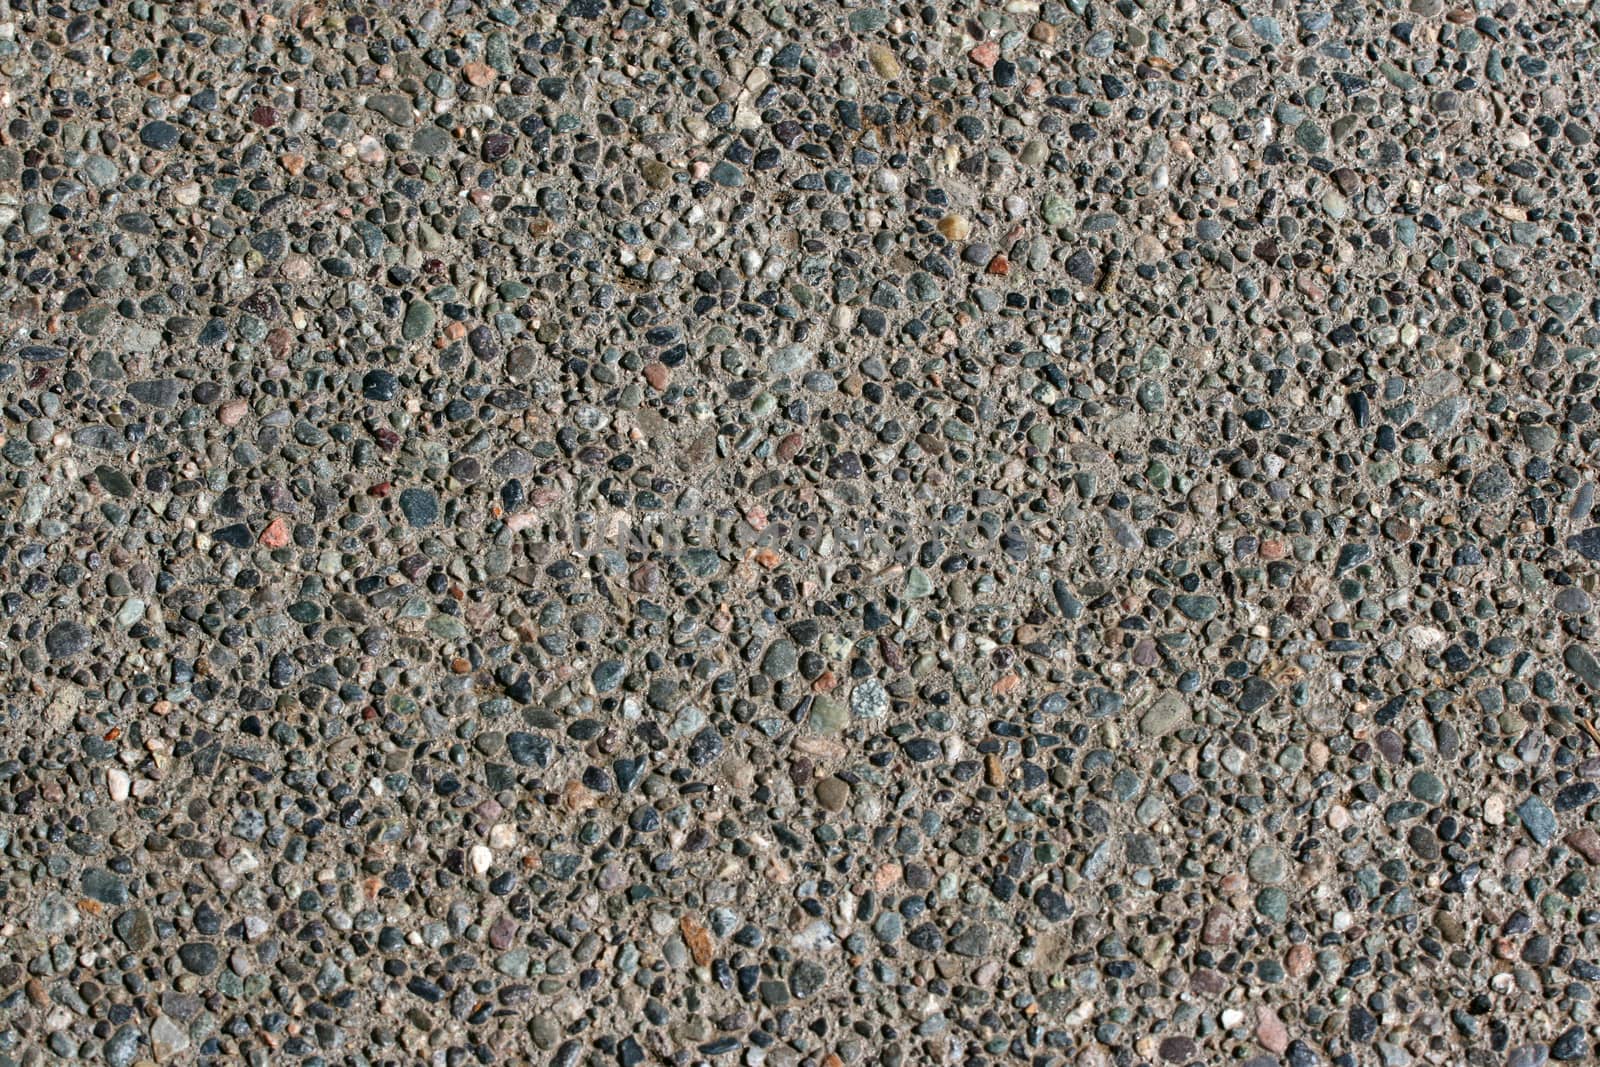 Gravel road texture with various colored stones